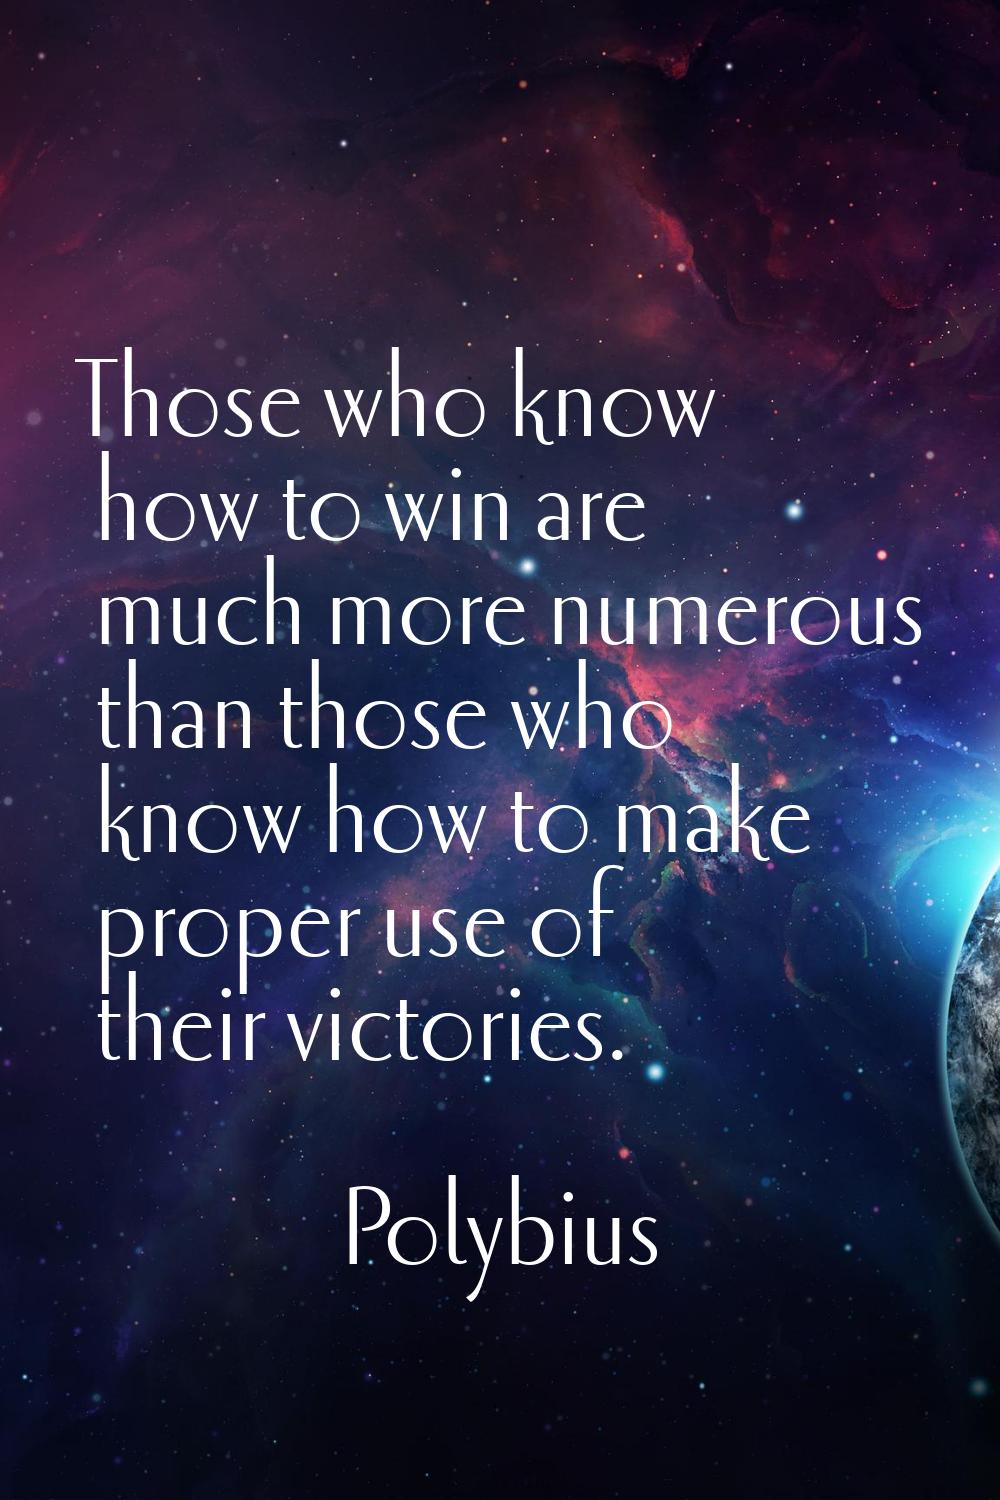 Those who know how to win are much more numerous than those who know how to make proper use of thei